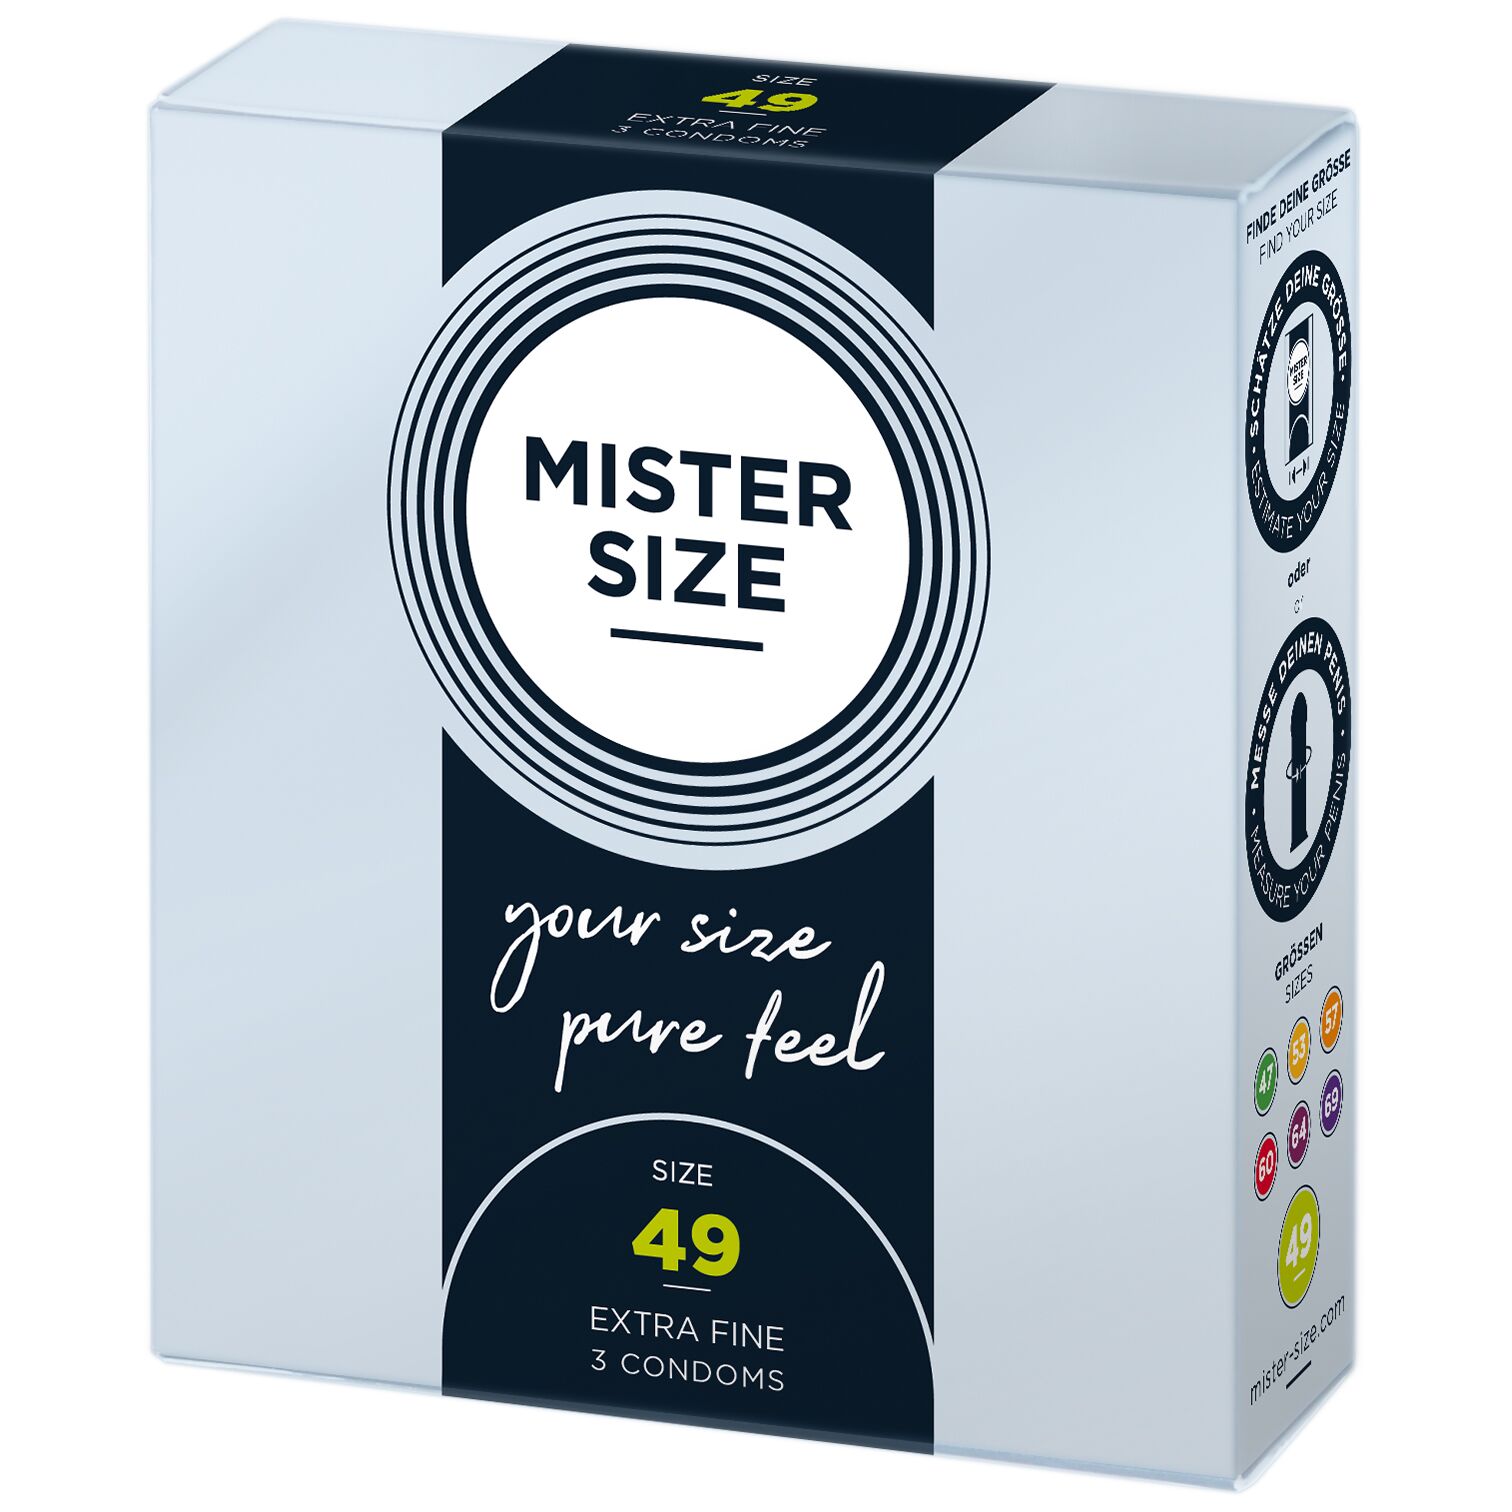  Mister Size — pure feel — 49 